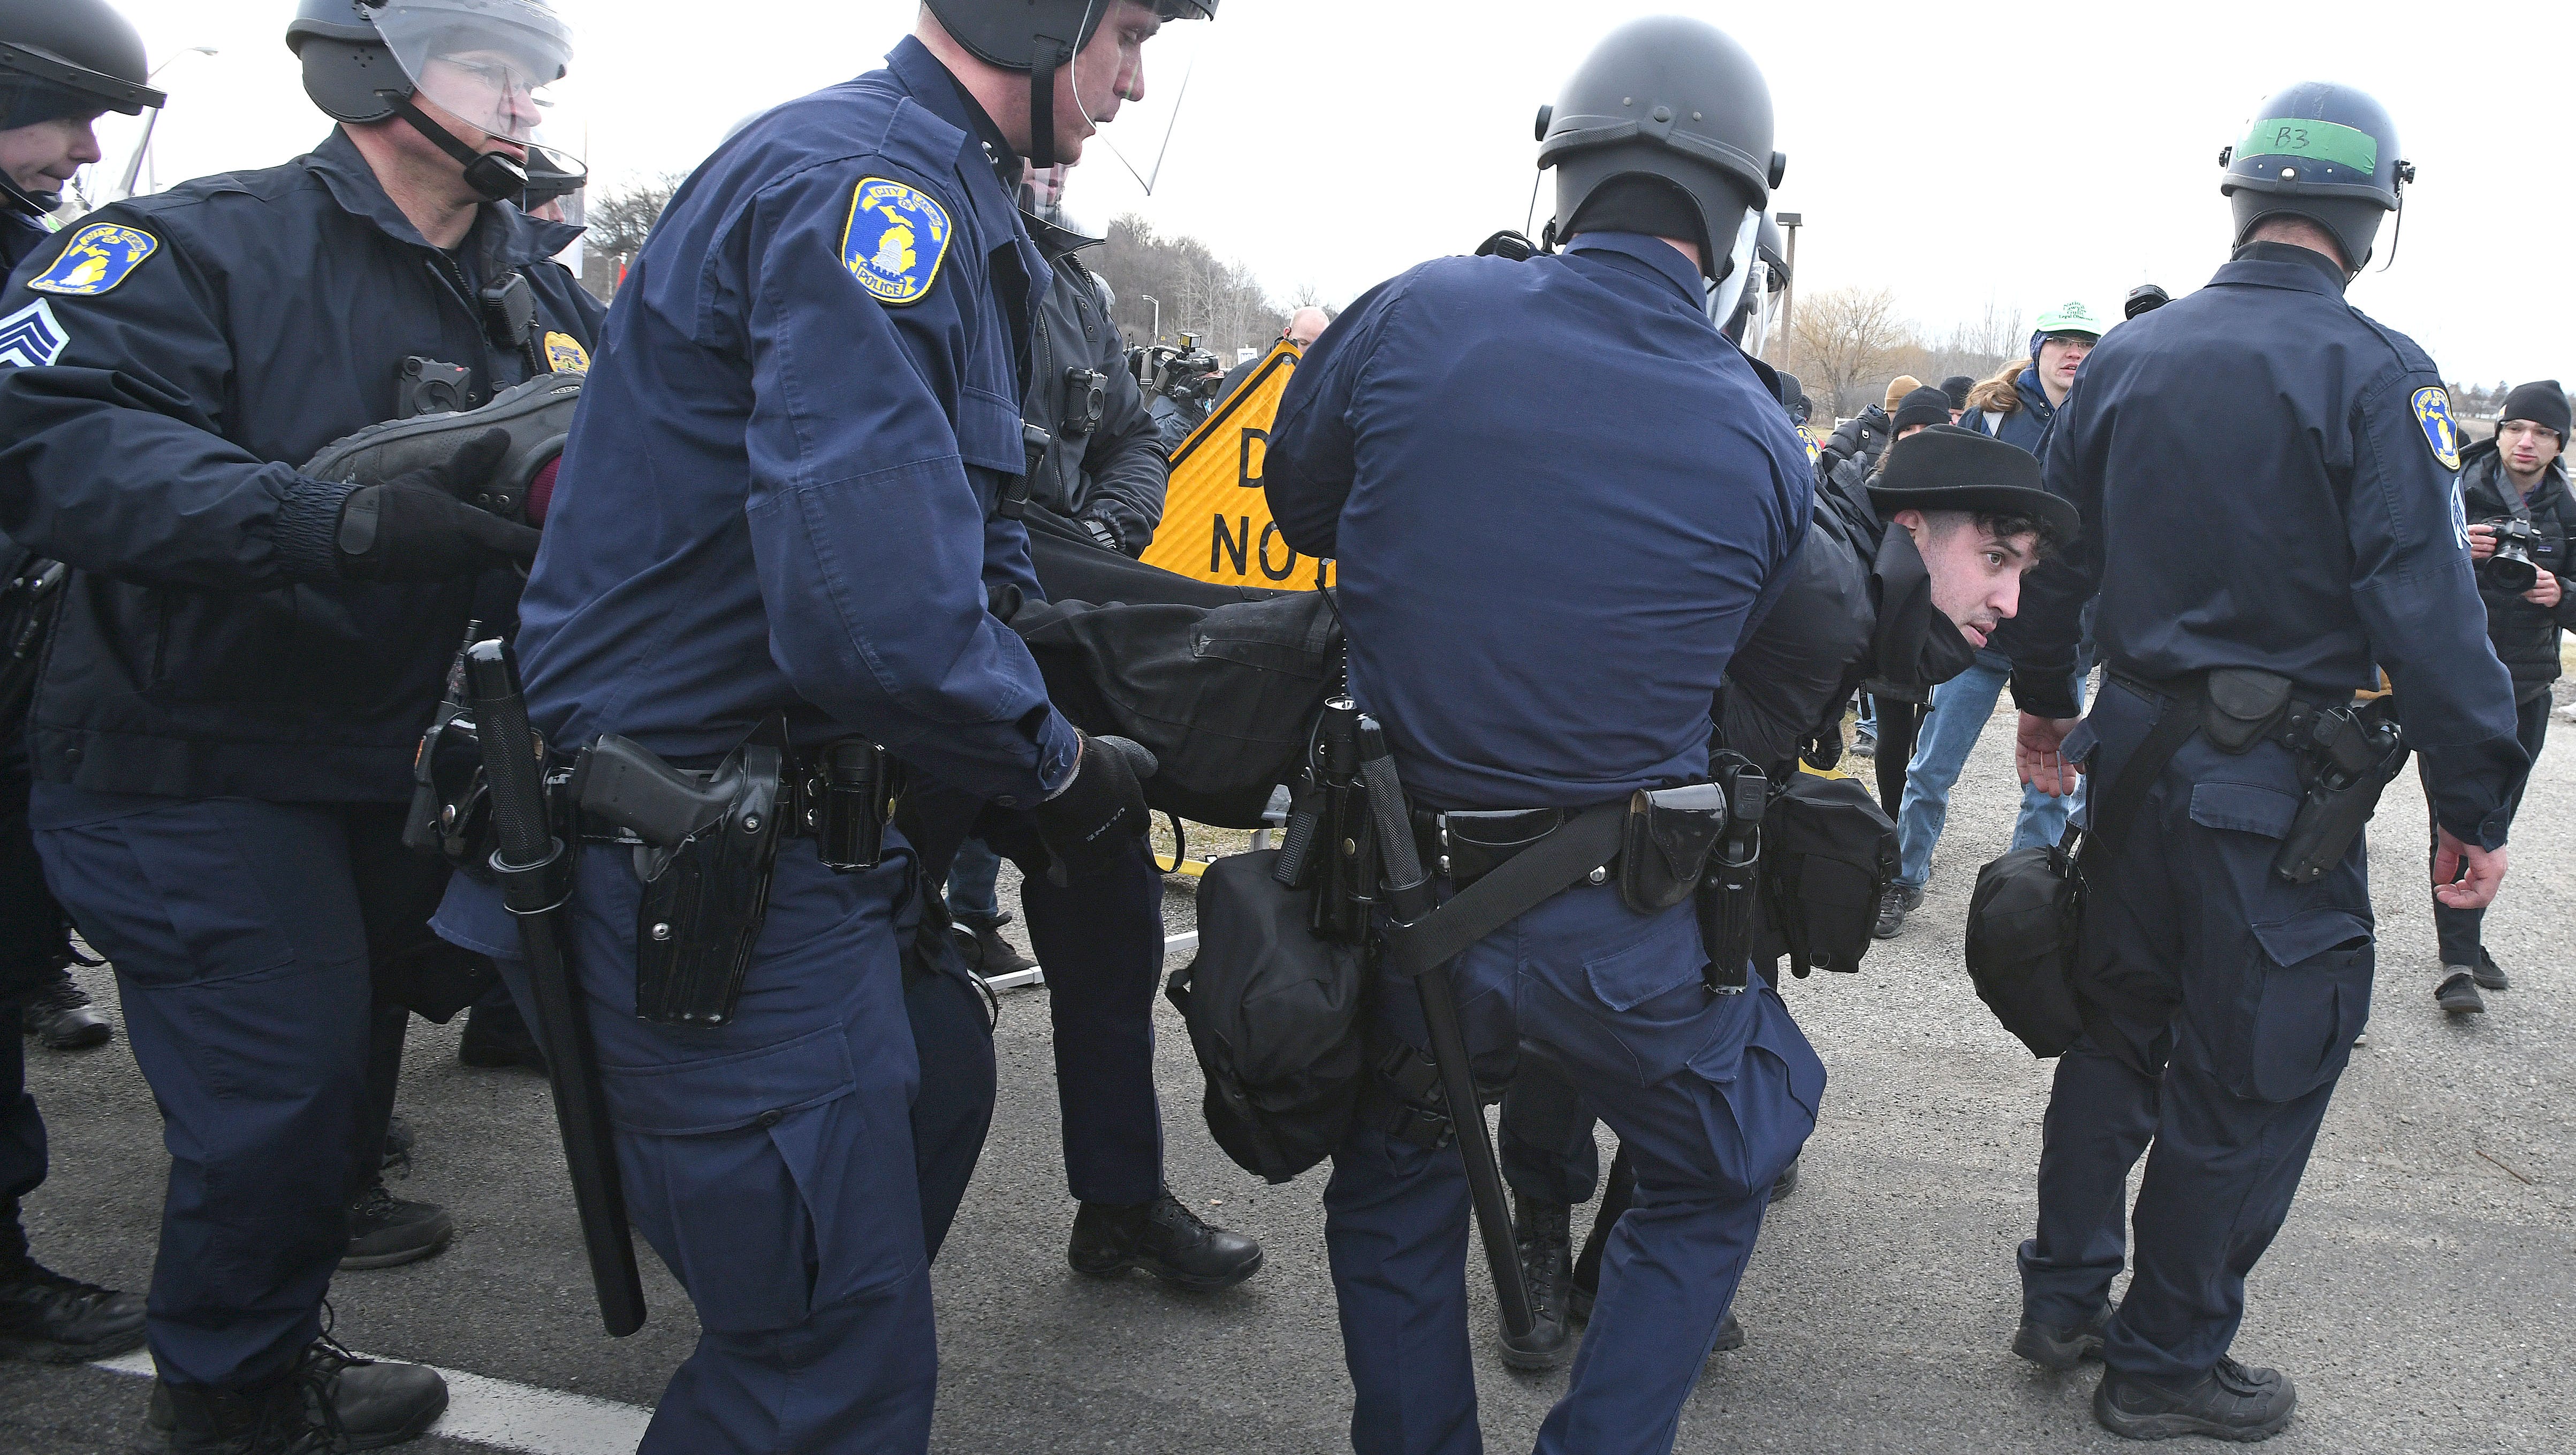 A protester is arrested and carried away for blocking a police vehicle outside the MSU Pavilion.